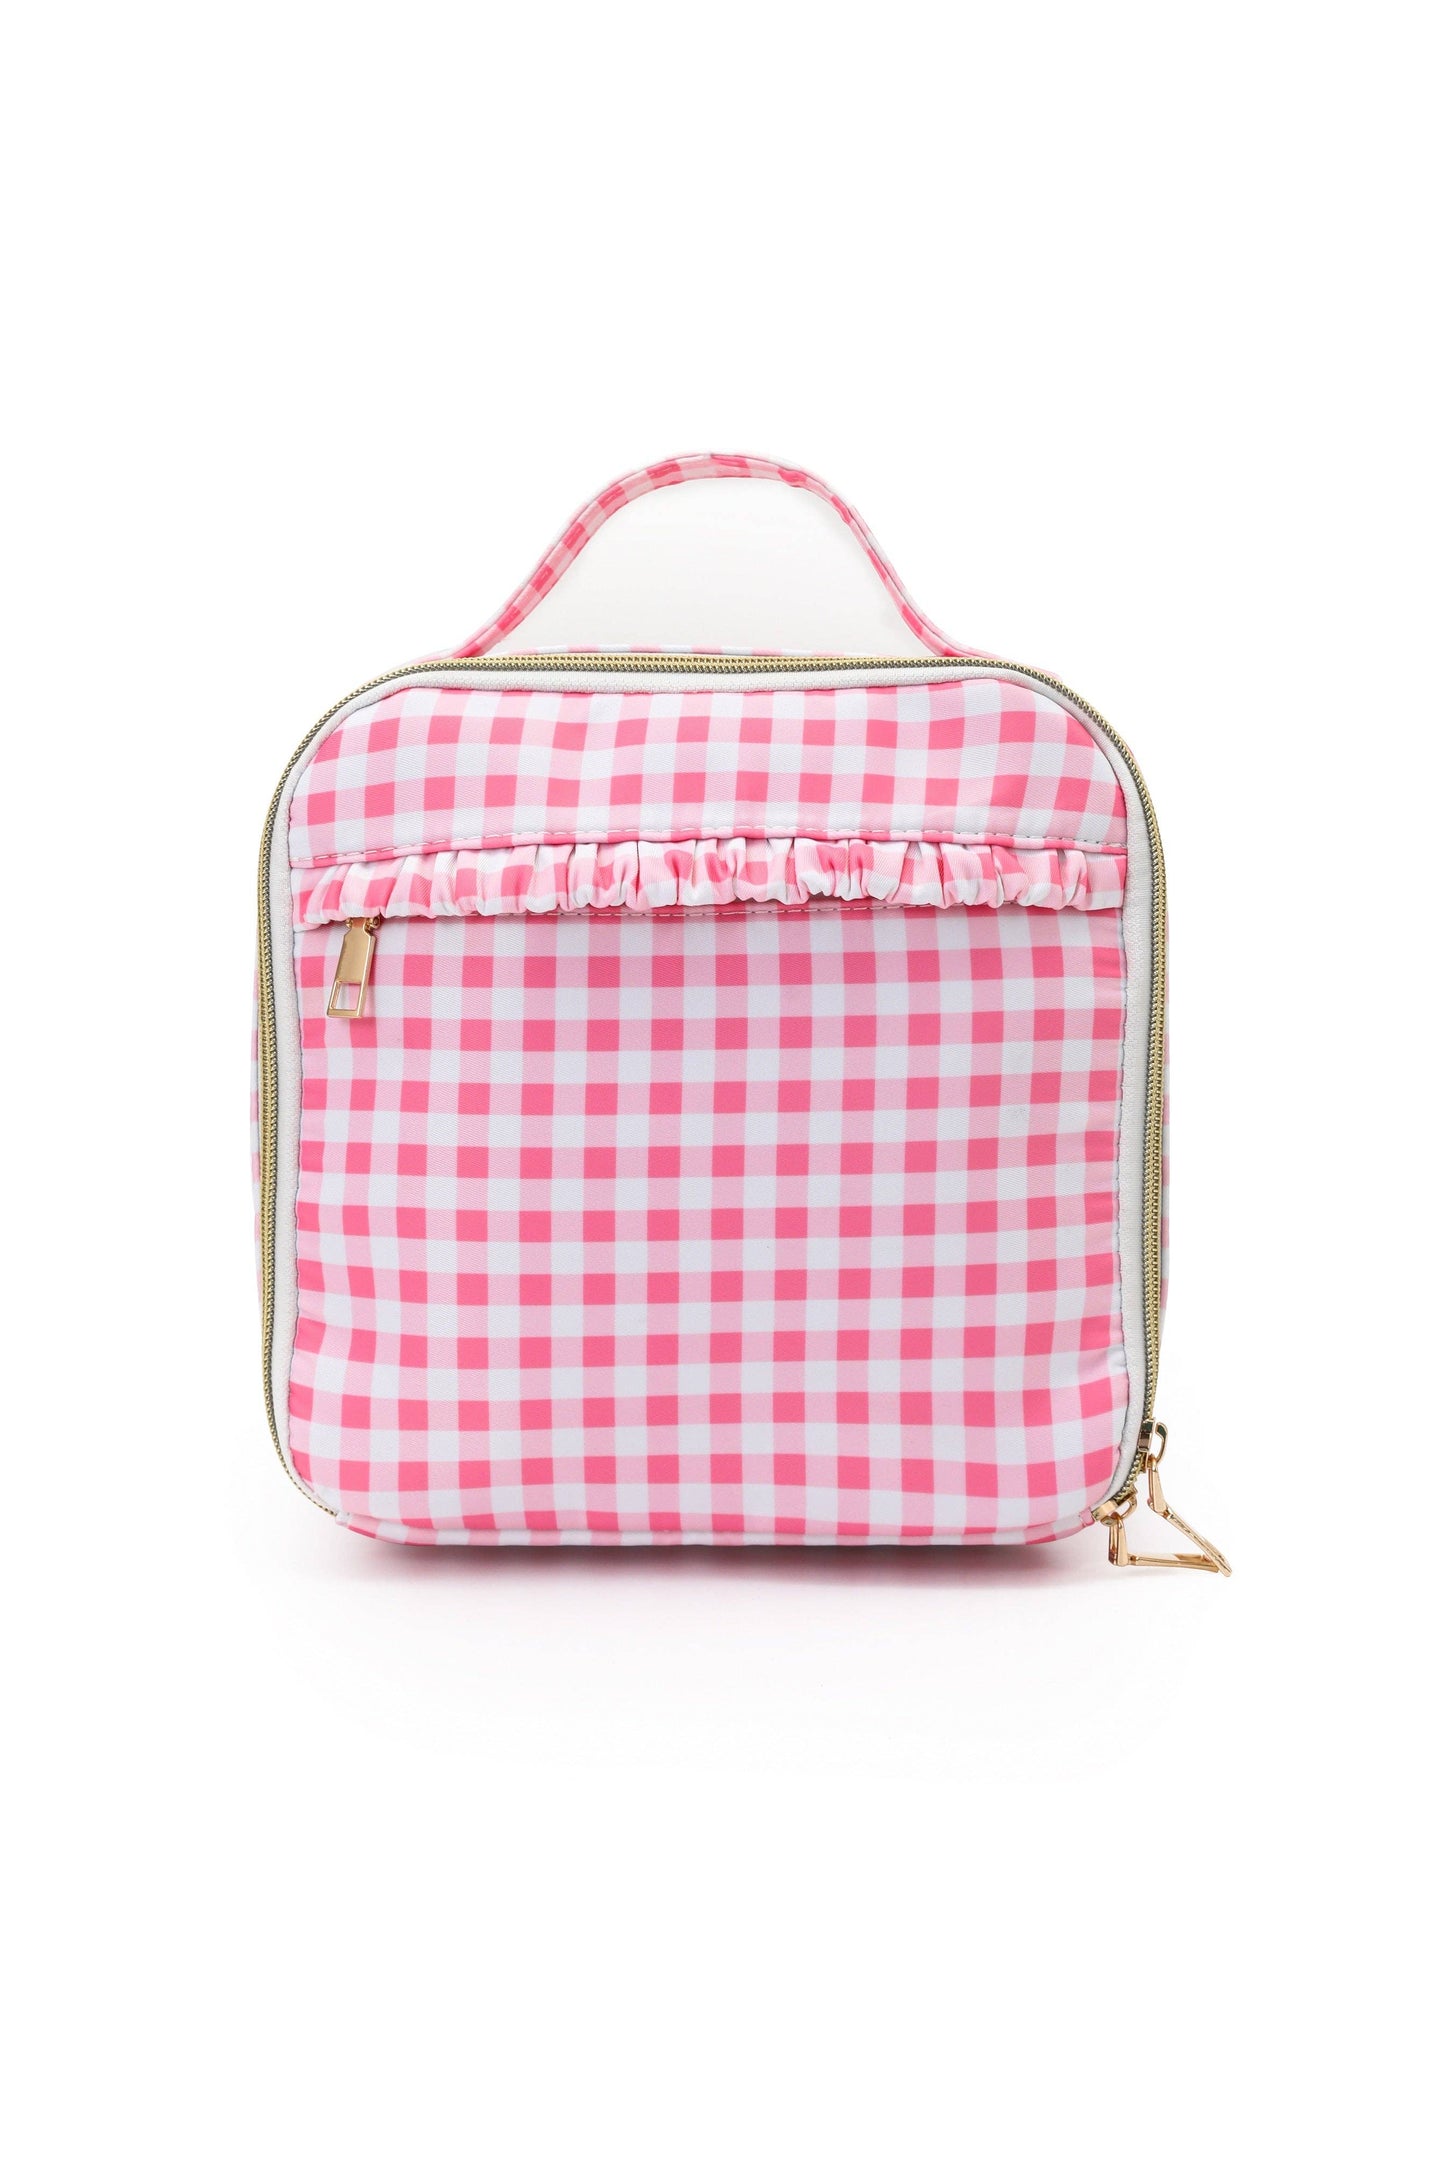 Pink Plaid Ruffle Baby Girls Lunch Boxes Bag